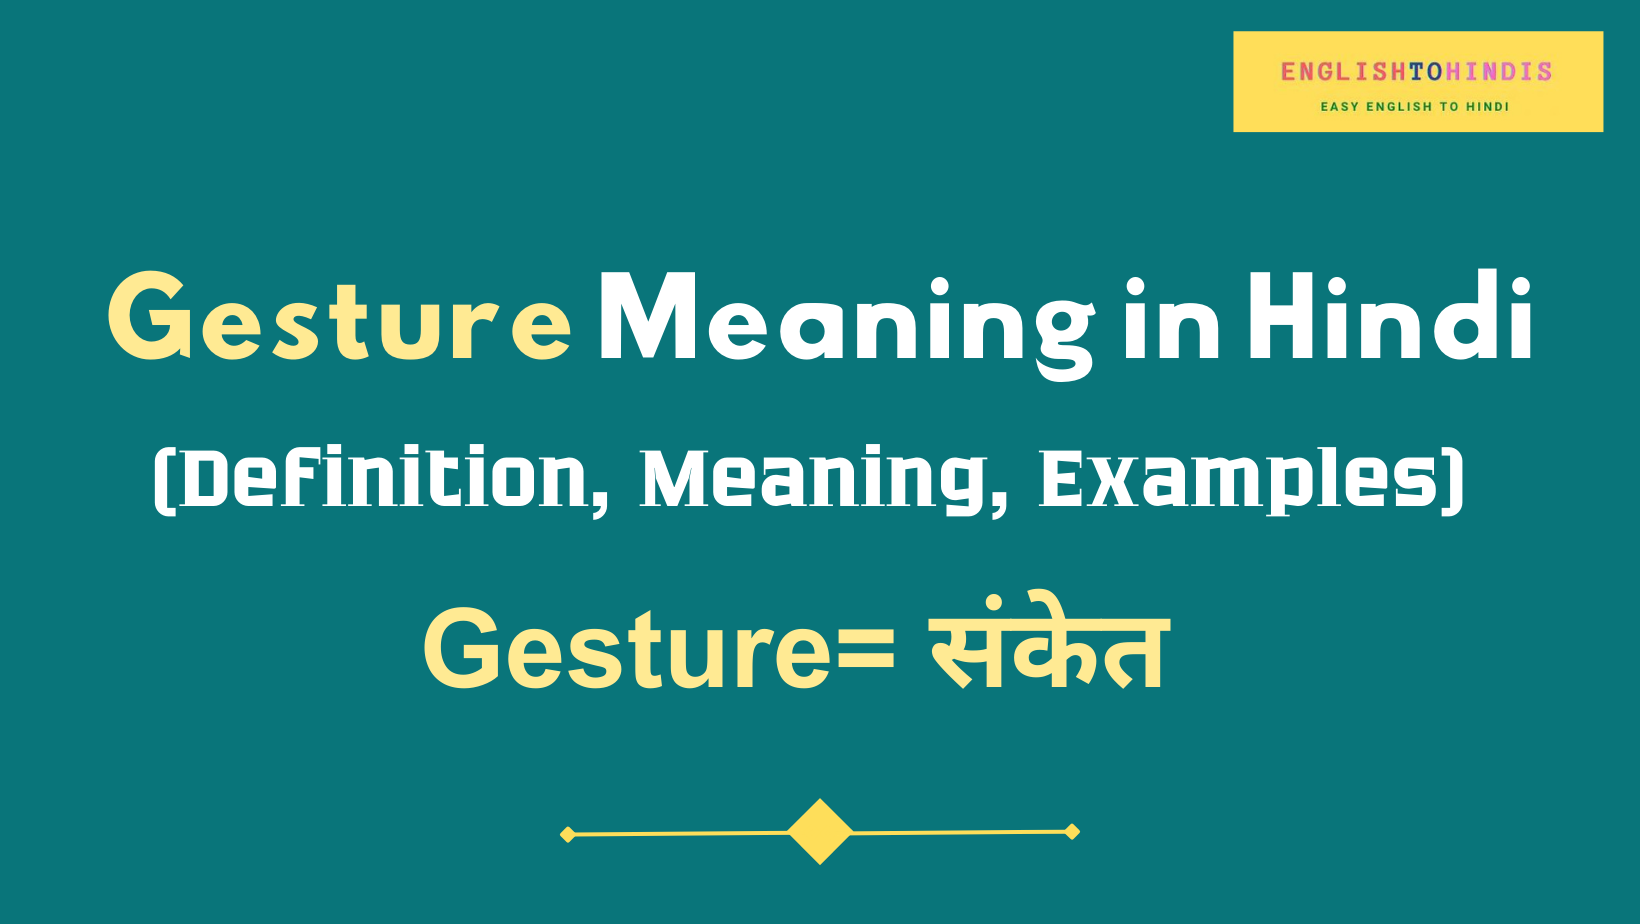 Gesture meaning in Hindi